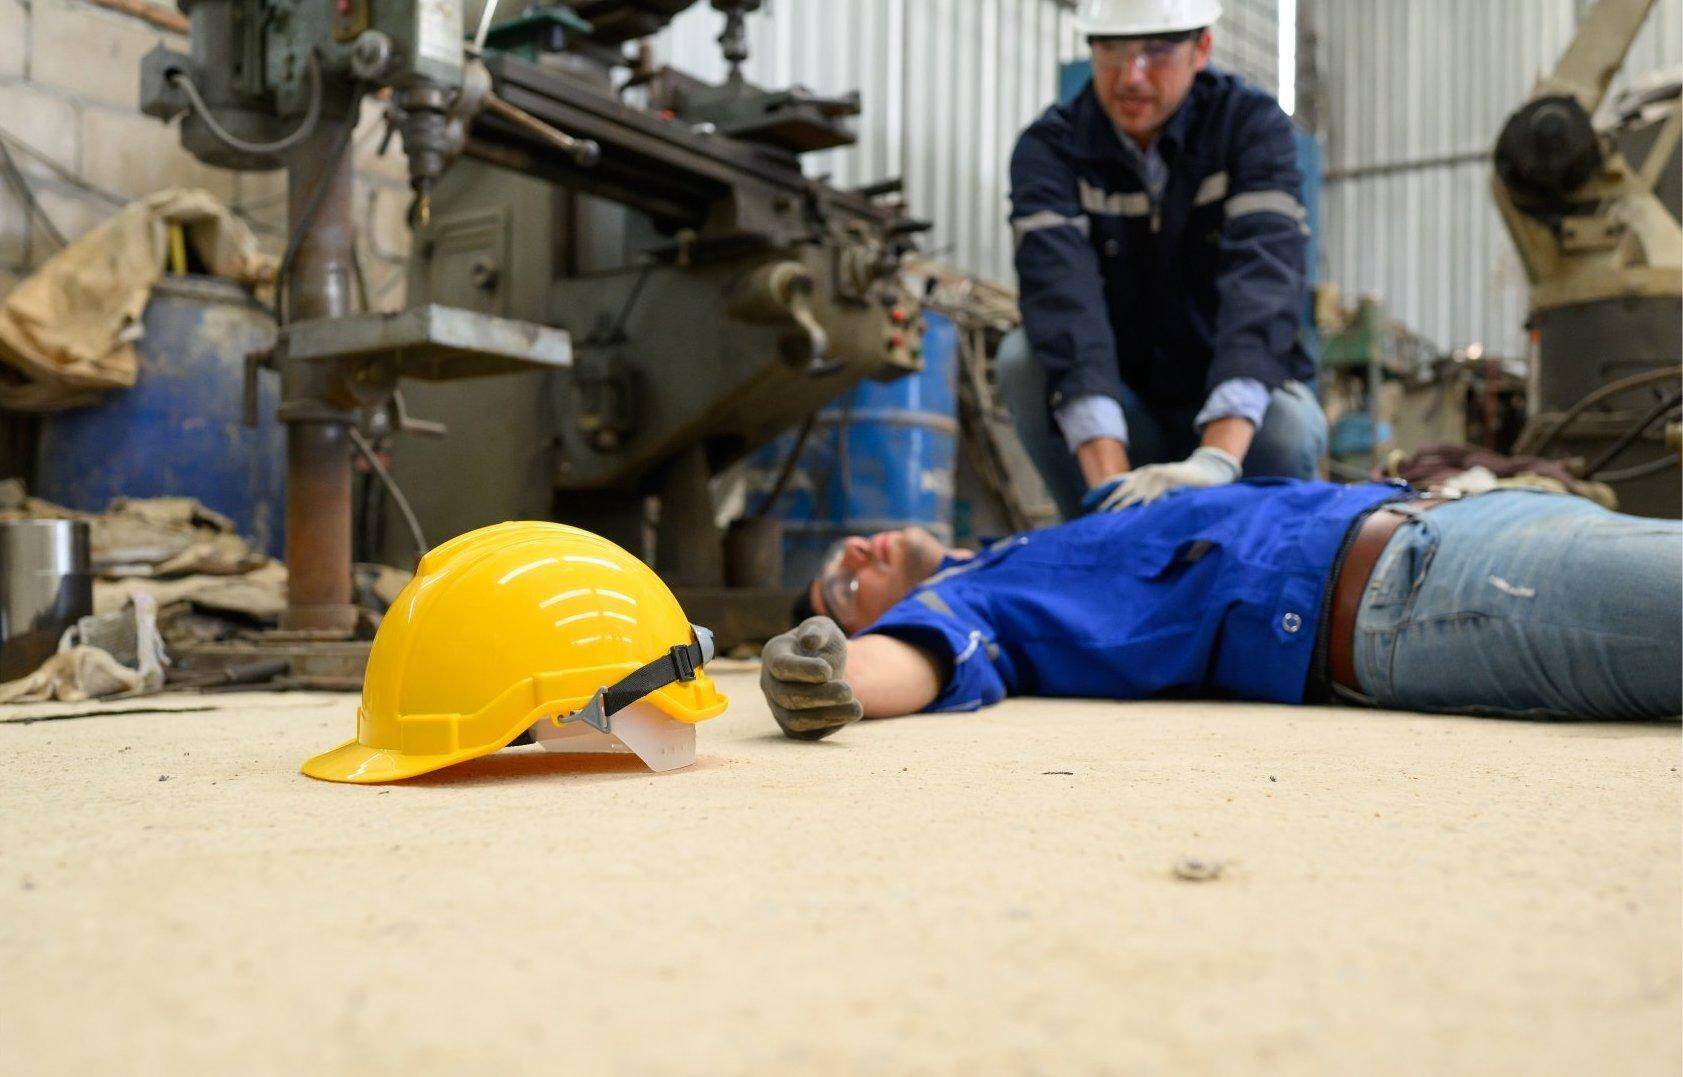 An unconscious man who has been injured on the job who will file for workers compensation in Valdosta, Georgia